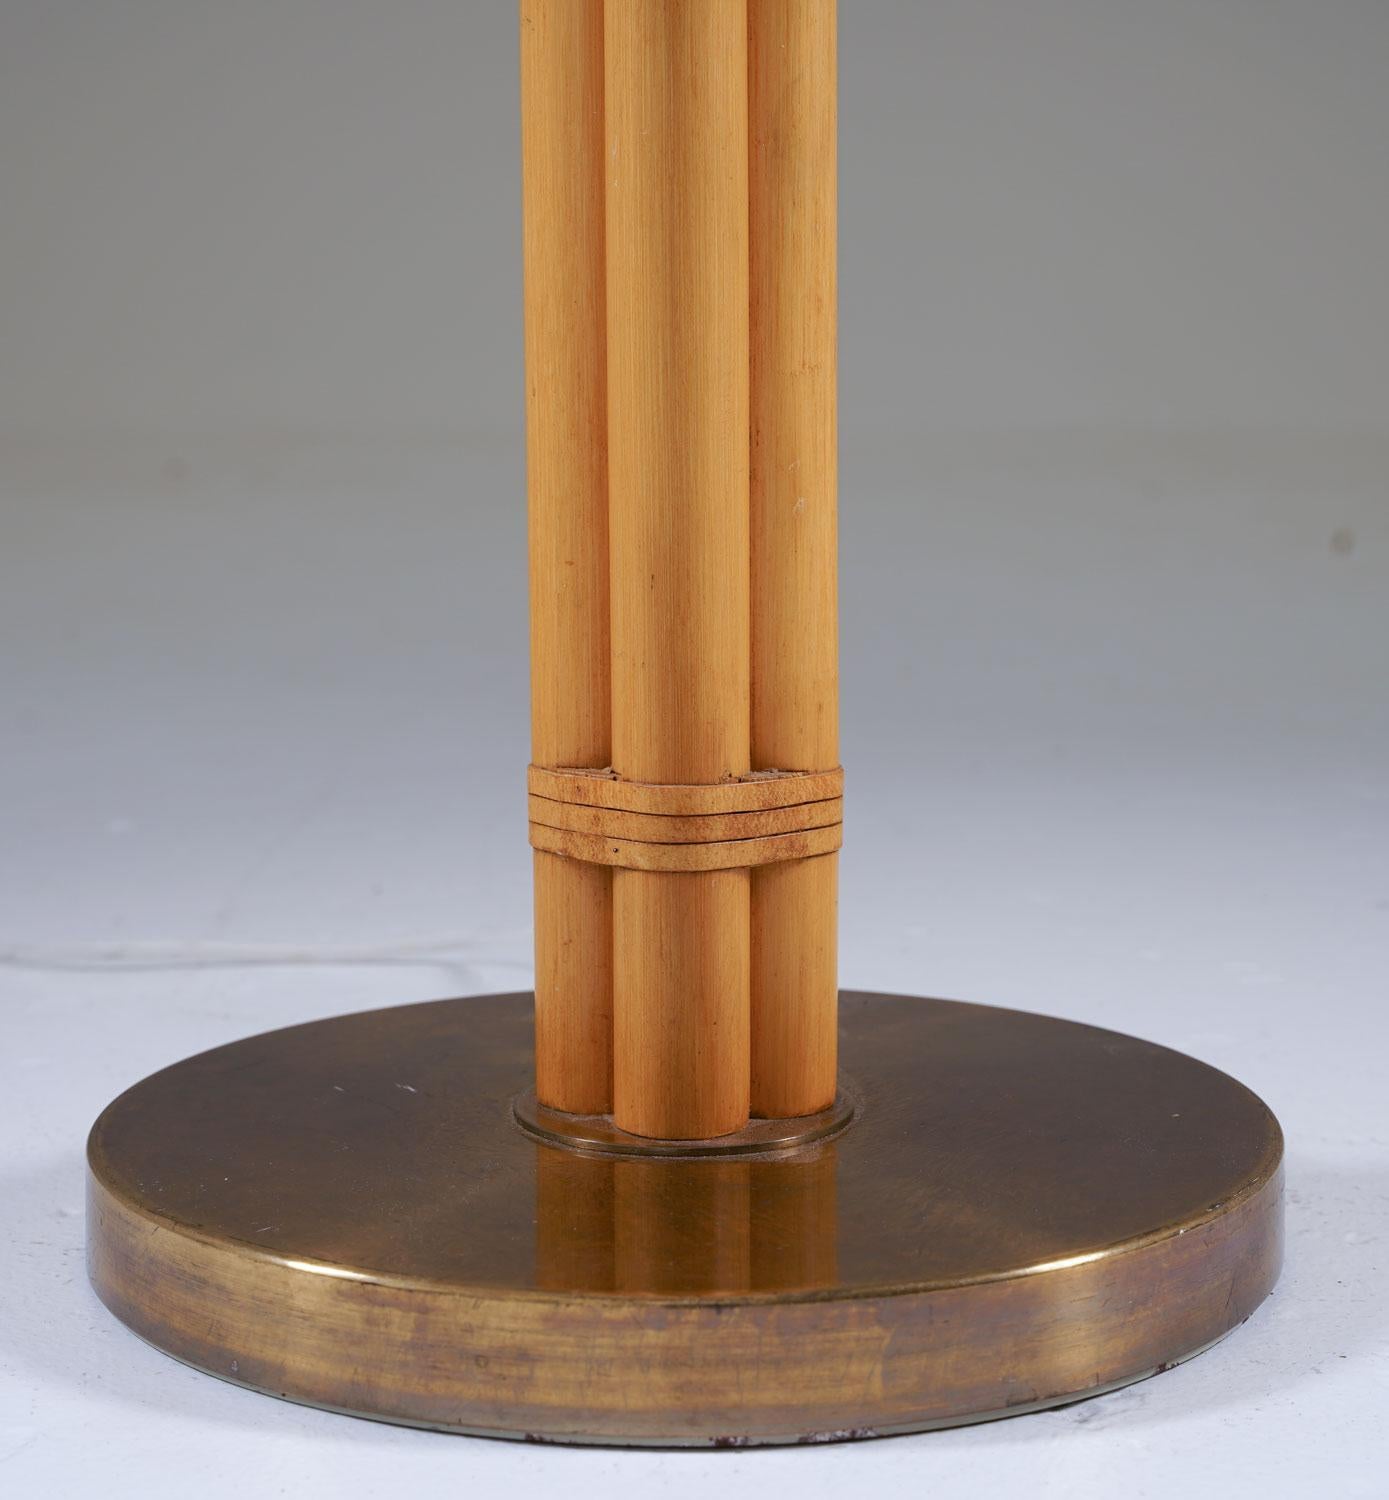 20th Century Scandinavian Midcentury Floor Lamp in Brass and Bamboo by Bergboms, Sweden For Sale